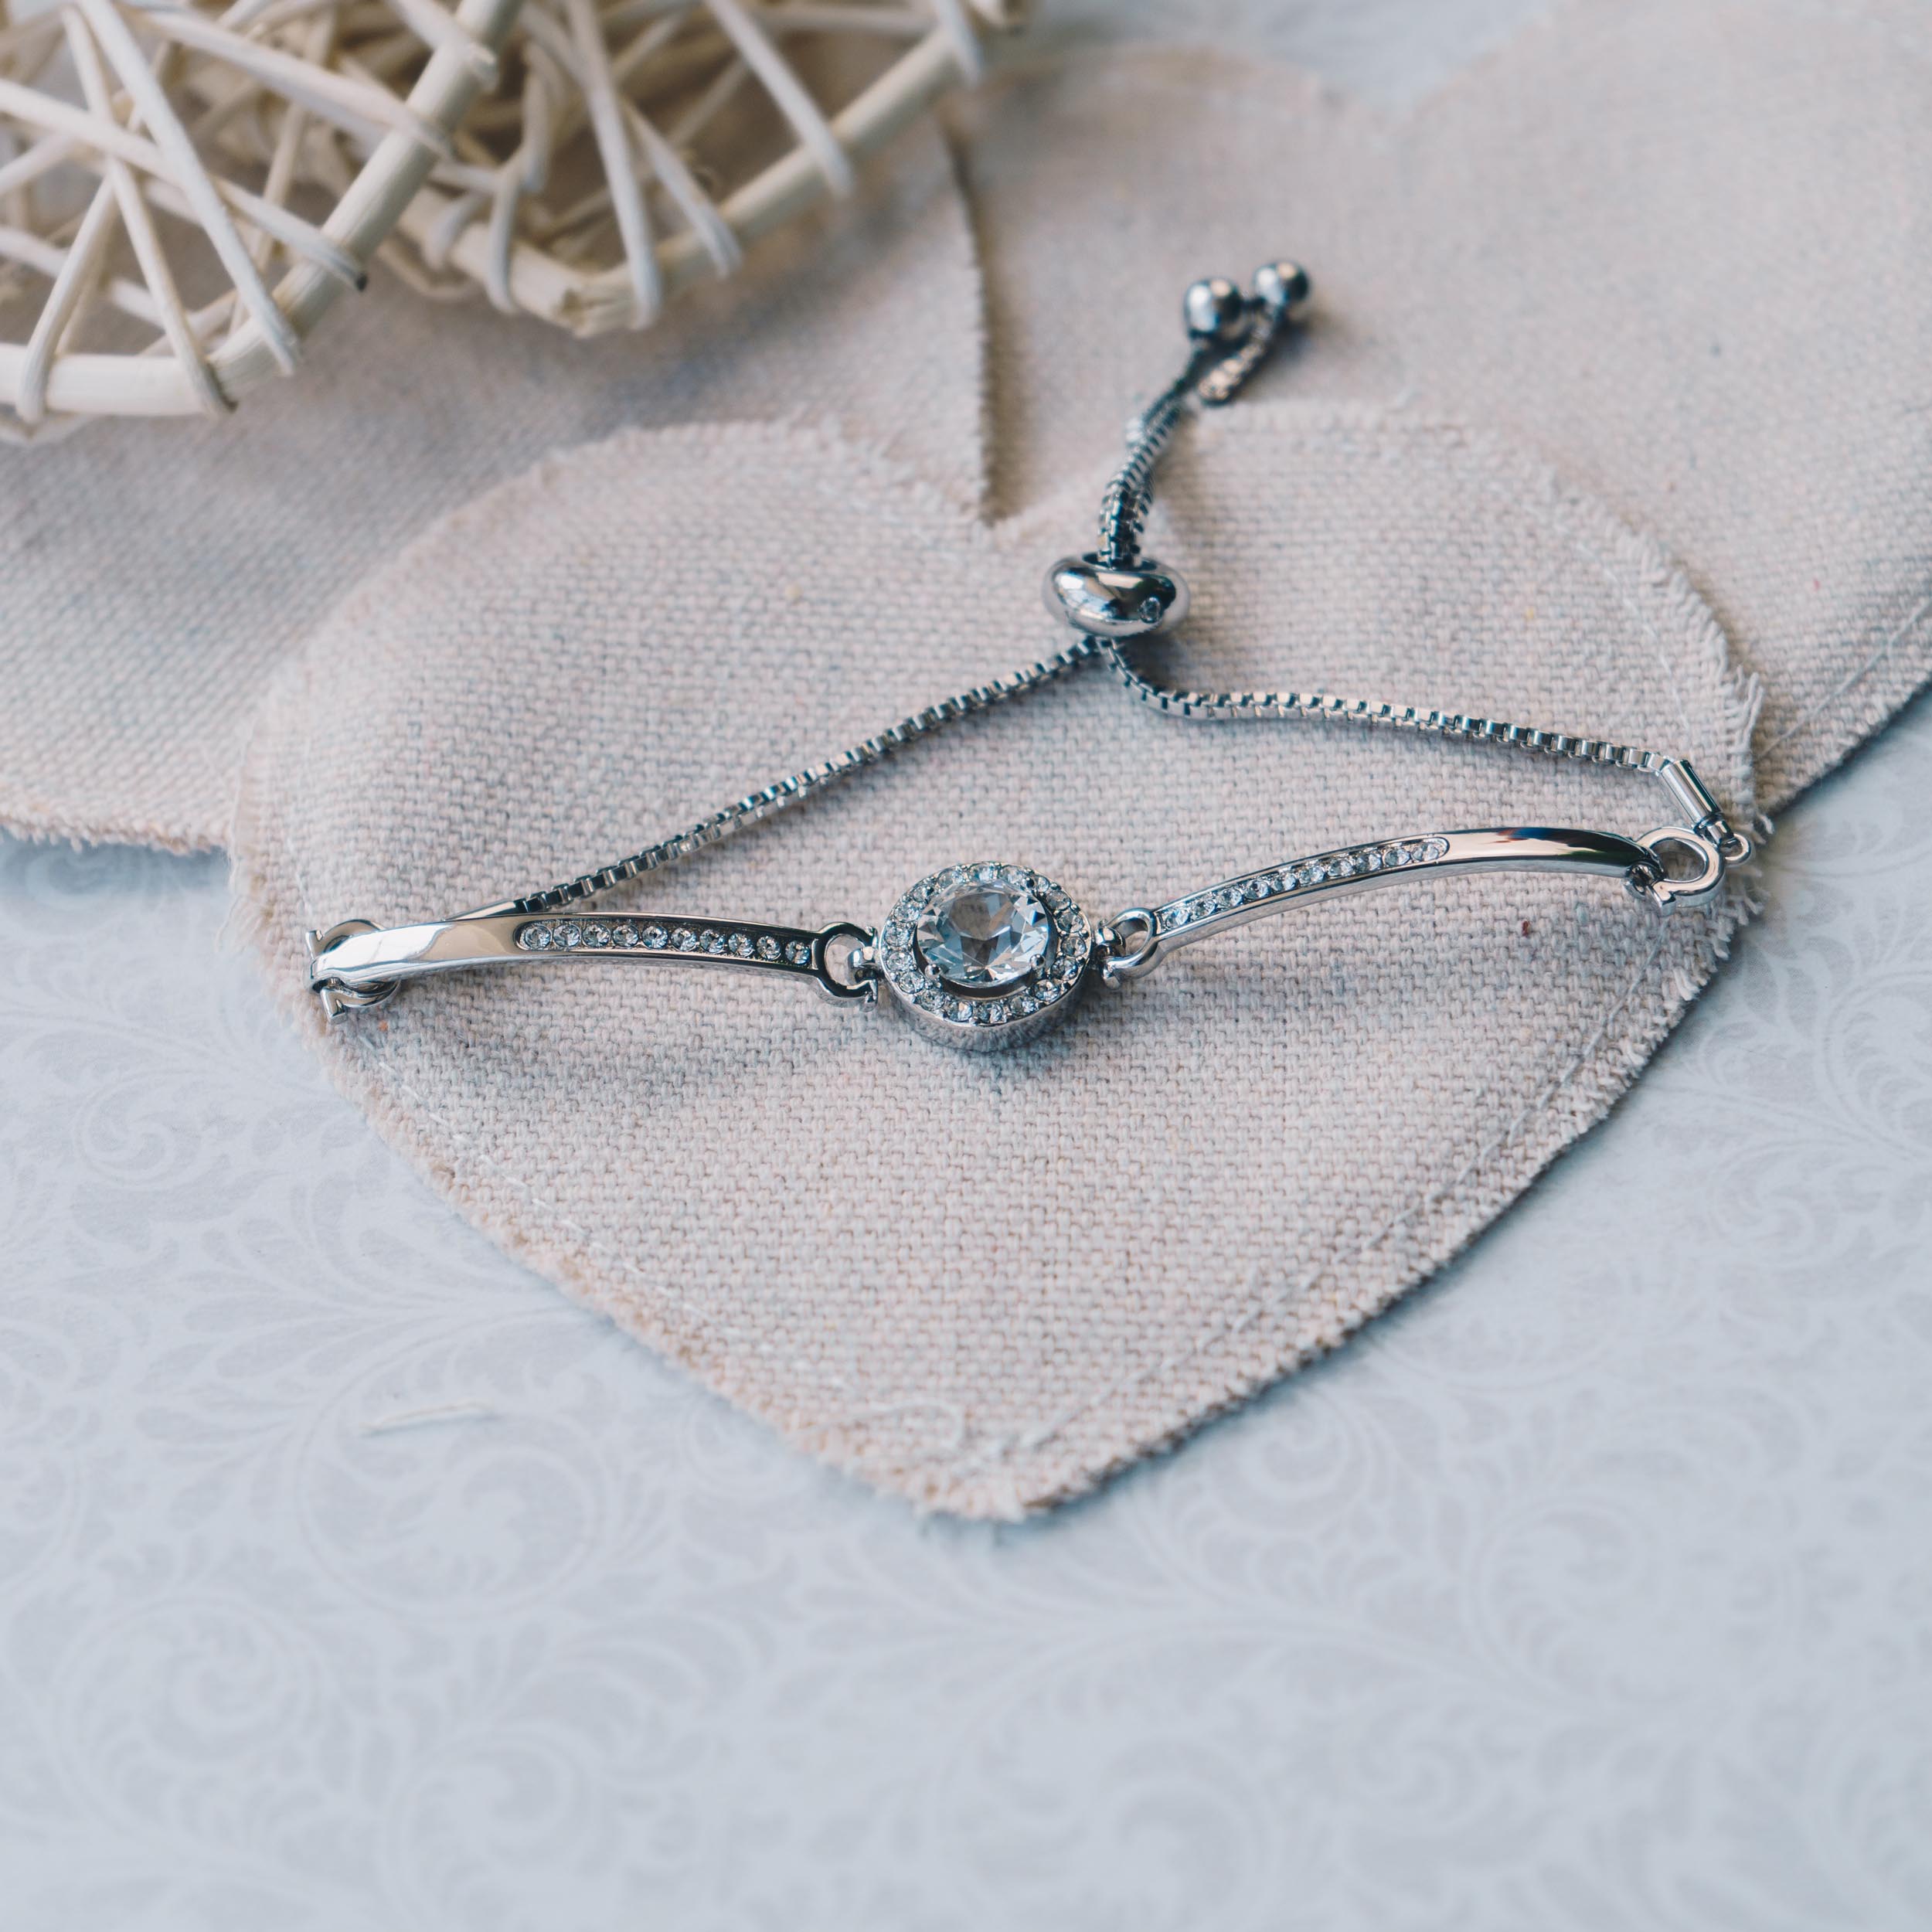 Silver Plated Halo Friendship Bracelet Created with Zircondia® Crystals